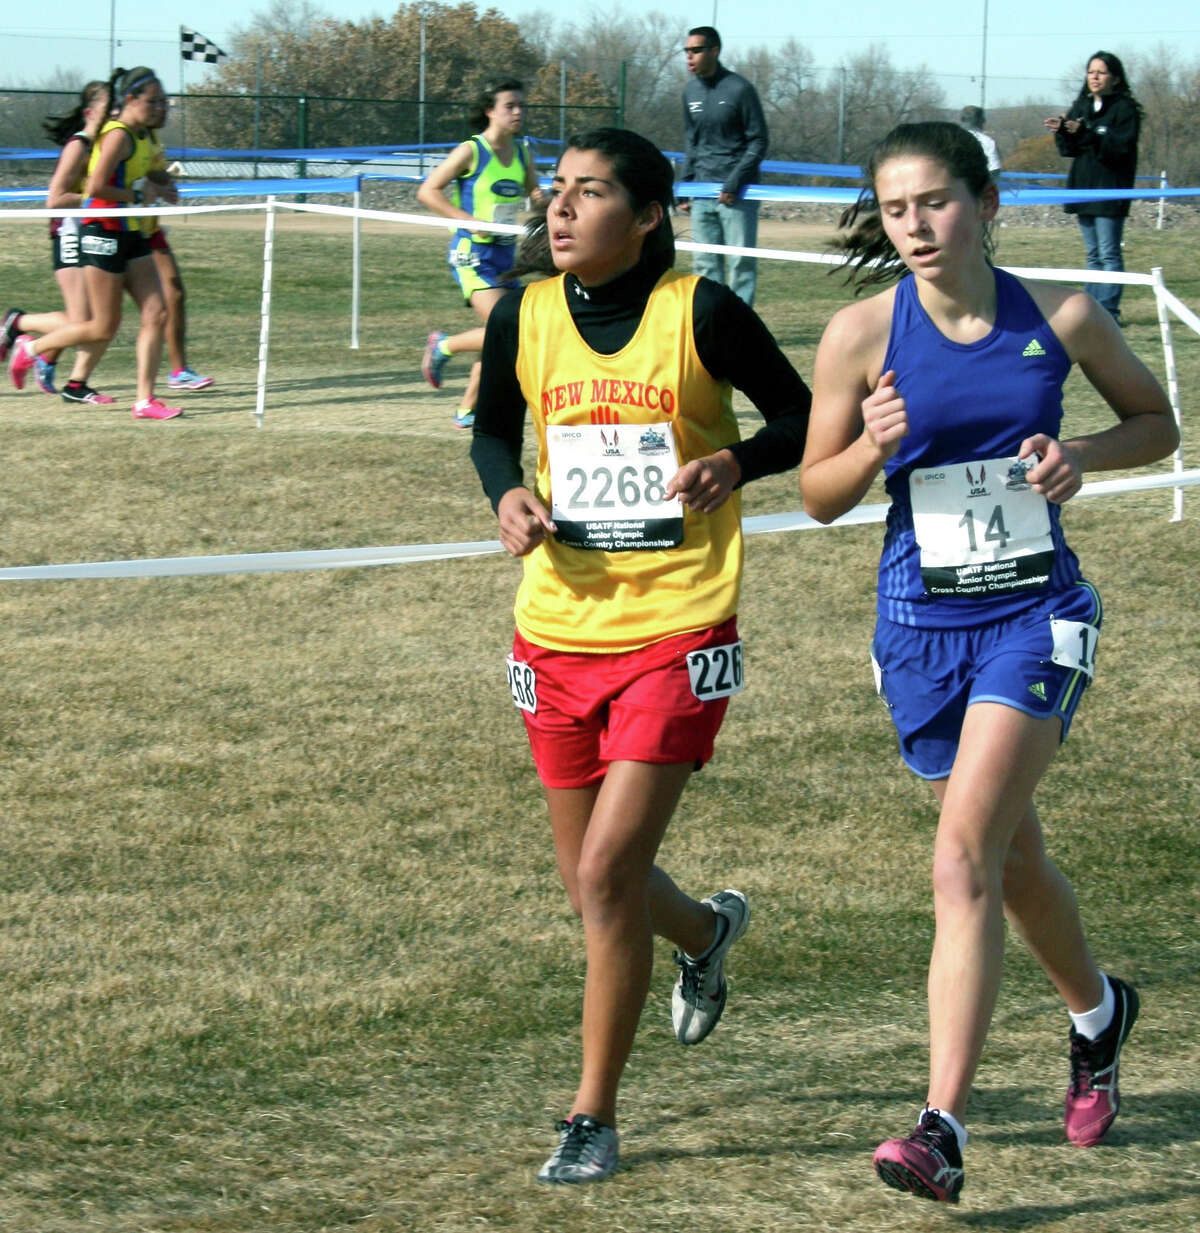 Emily Day, right, of New Milford High School keeps pace with a rival while running in December, 2012 in New Mexico in the national Junior Olympics cross country competition. Courtesy of Audrey Day